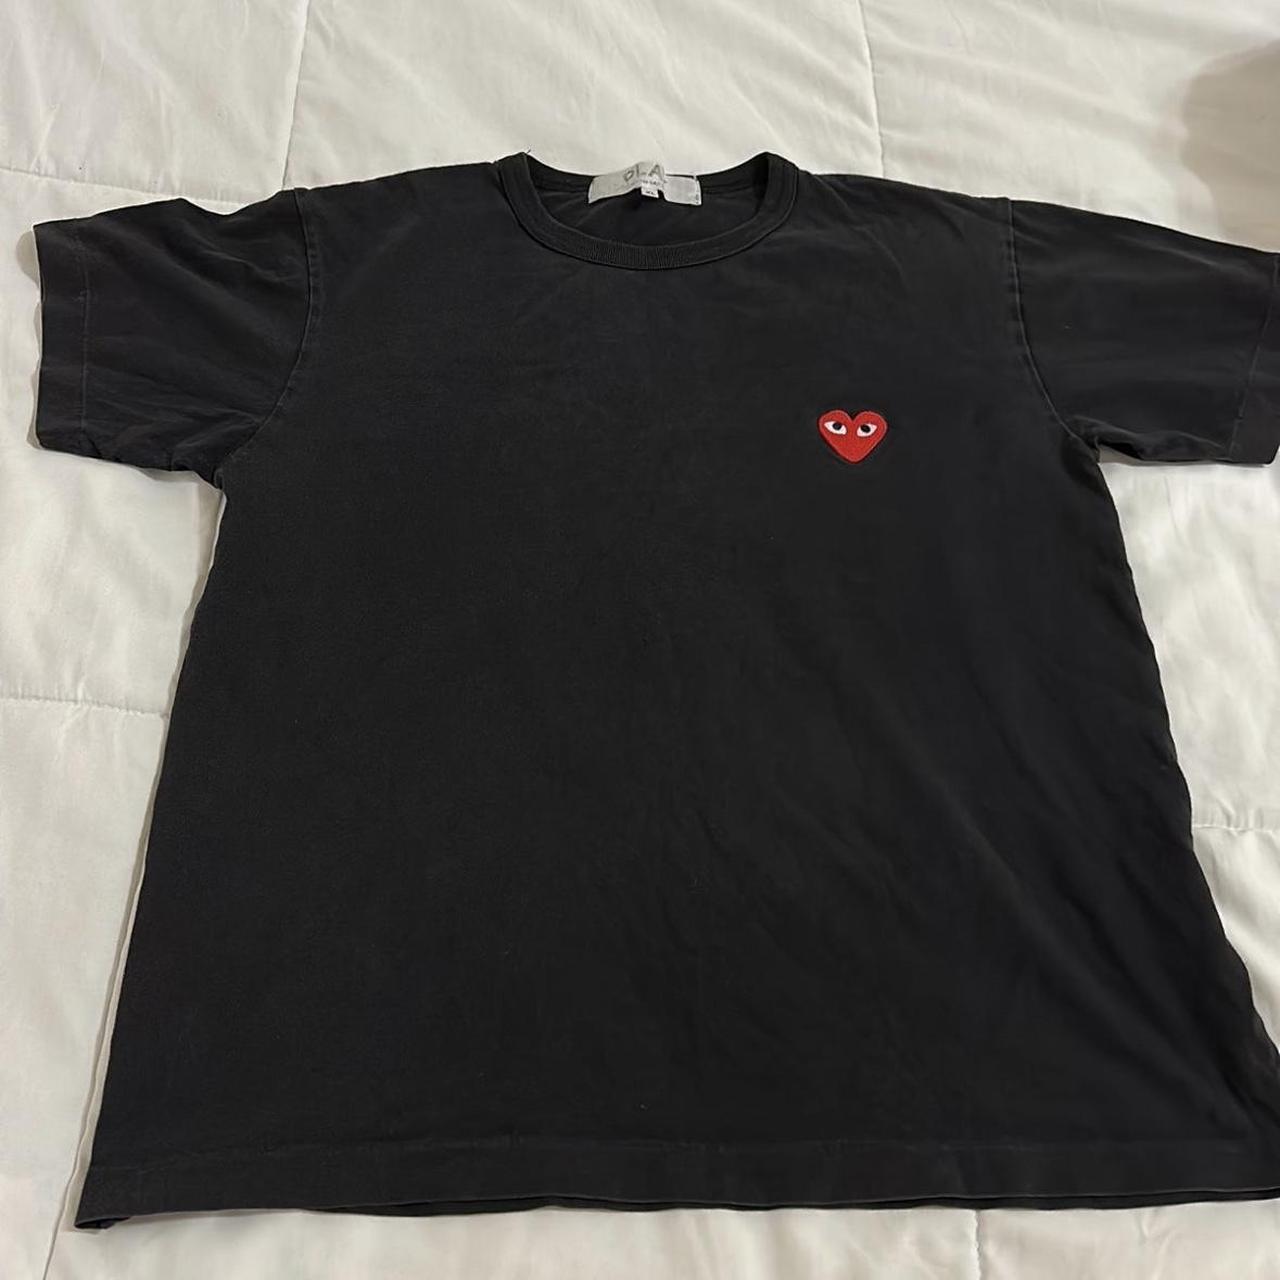 item listed by kvrxn